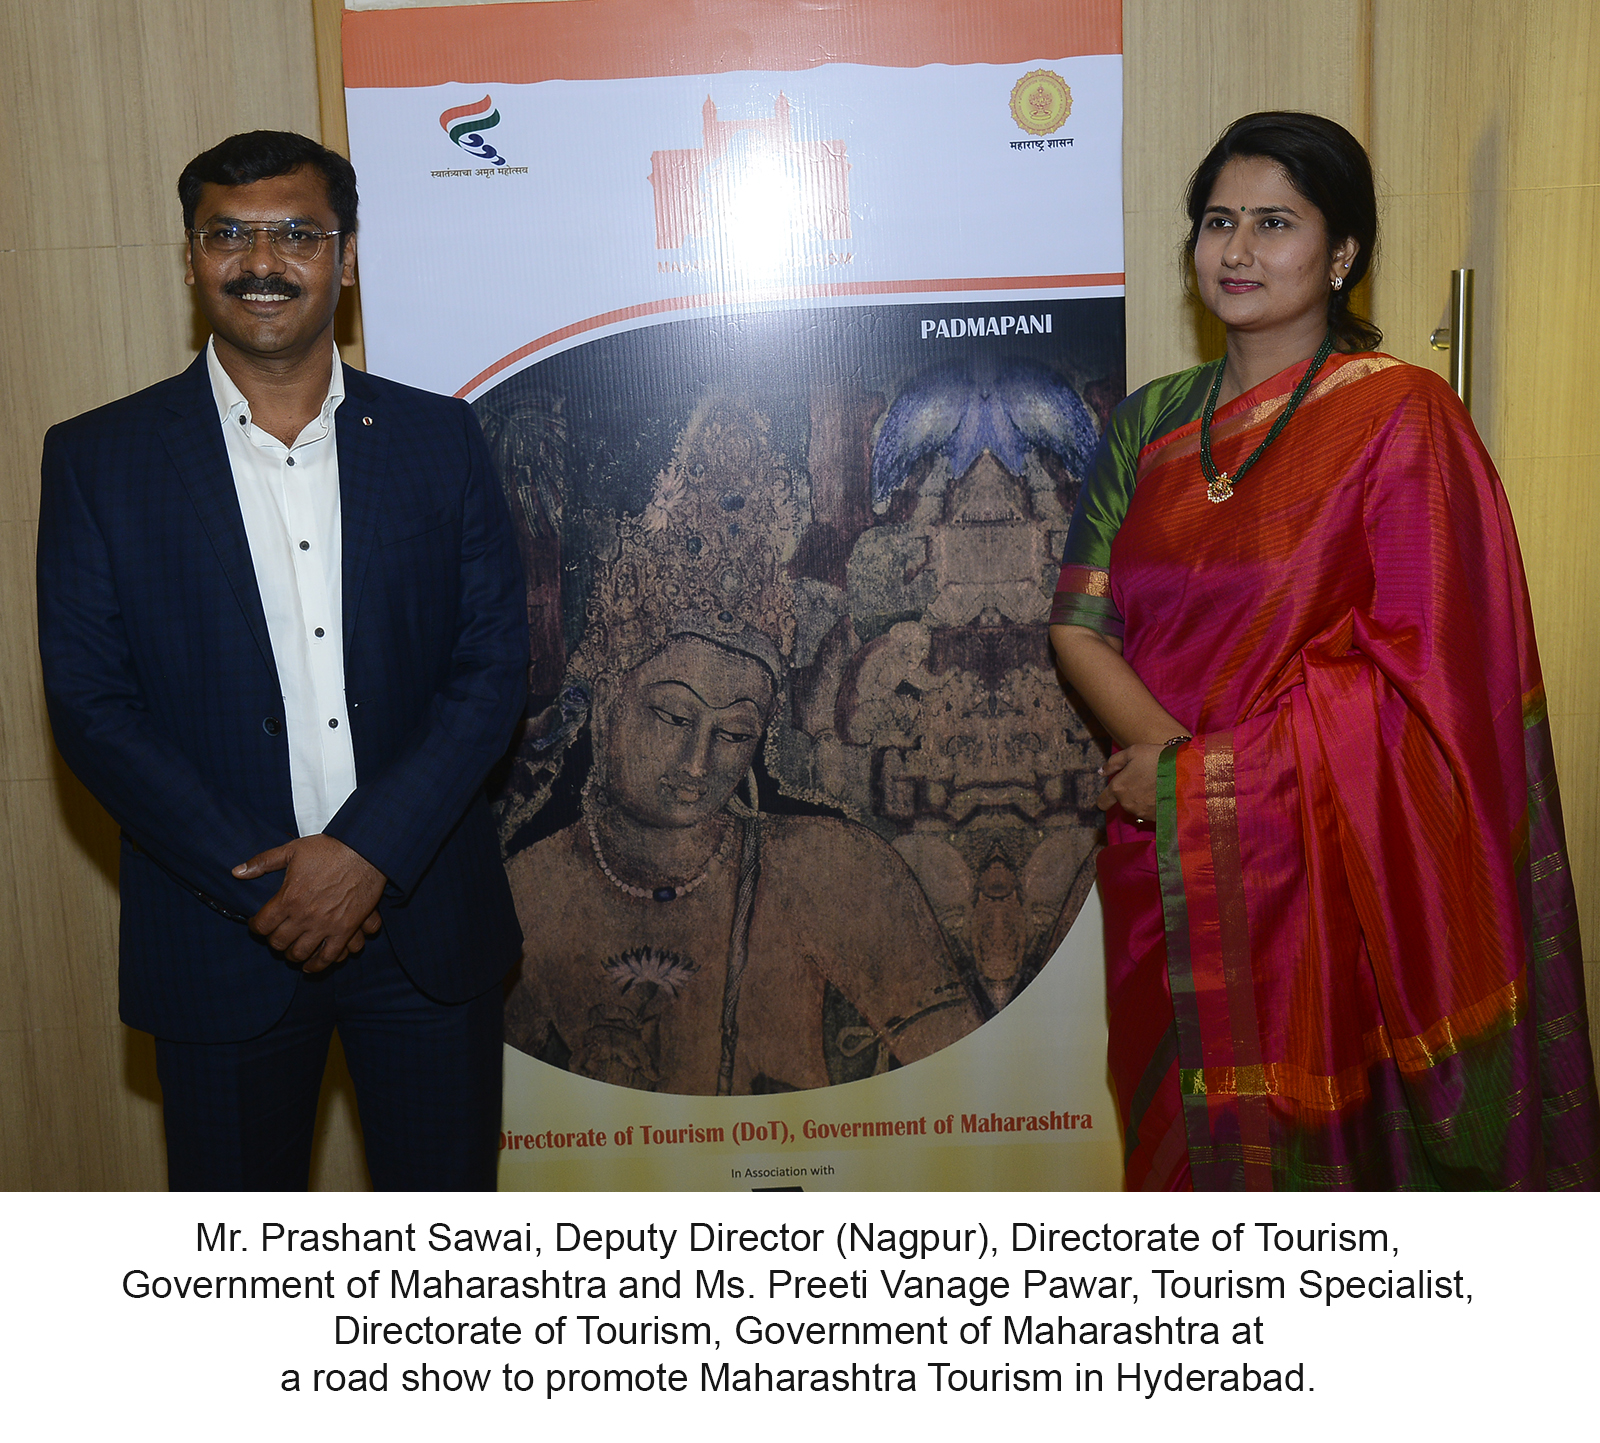 Maharashtra Tourism Aims To Boost Travel and Trade Opportunities in the Country though 9 City Road Show Tour